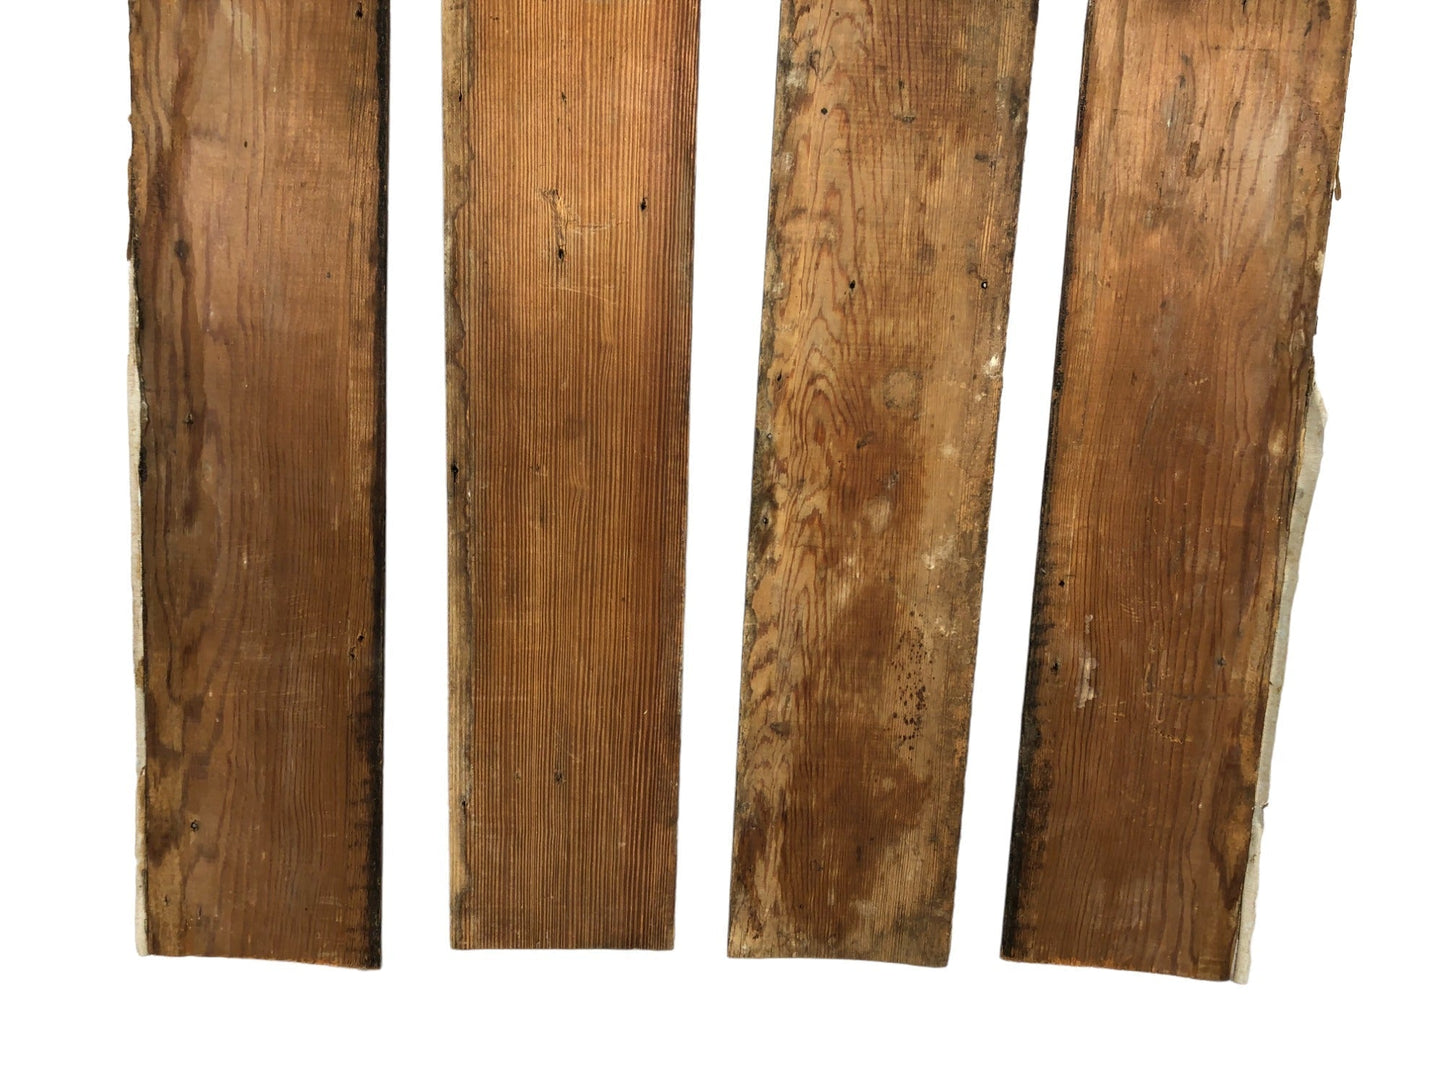 4 Wood Trim Pieces, Architectural Salvage, Reclaimed Vintage Wood Baseboard A67,